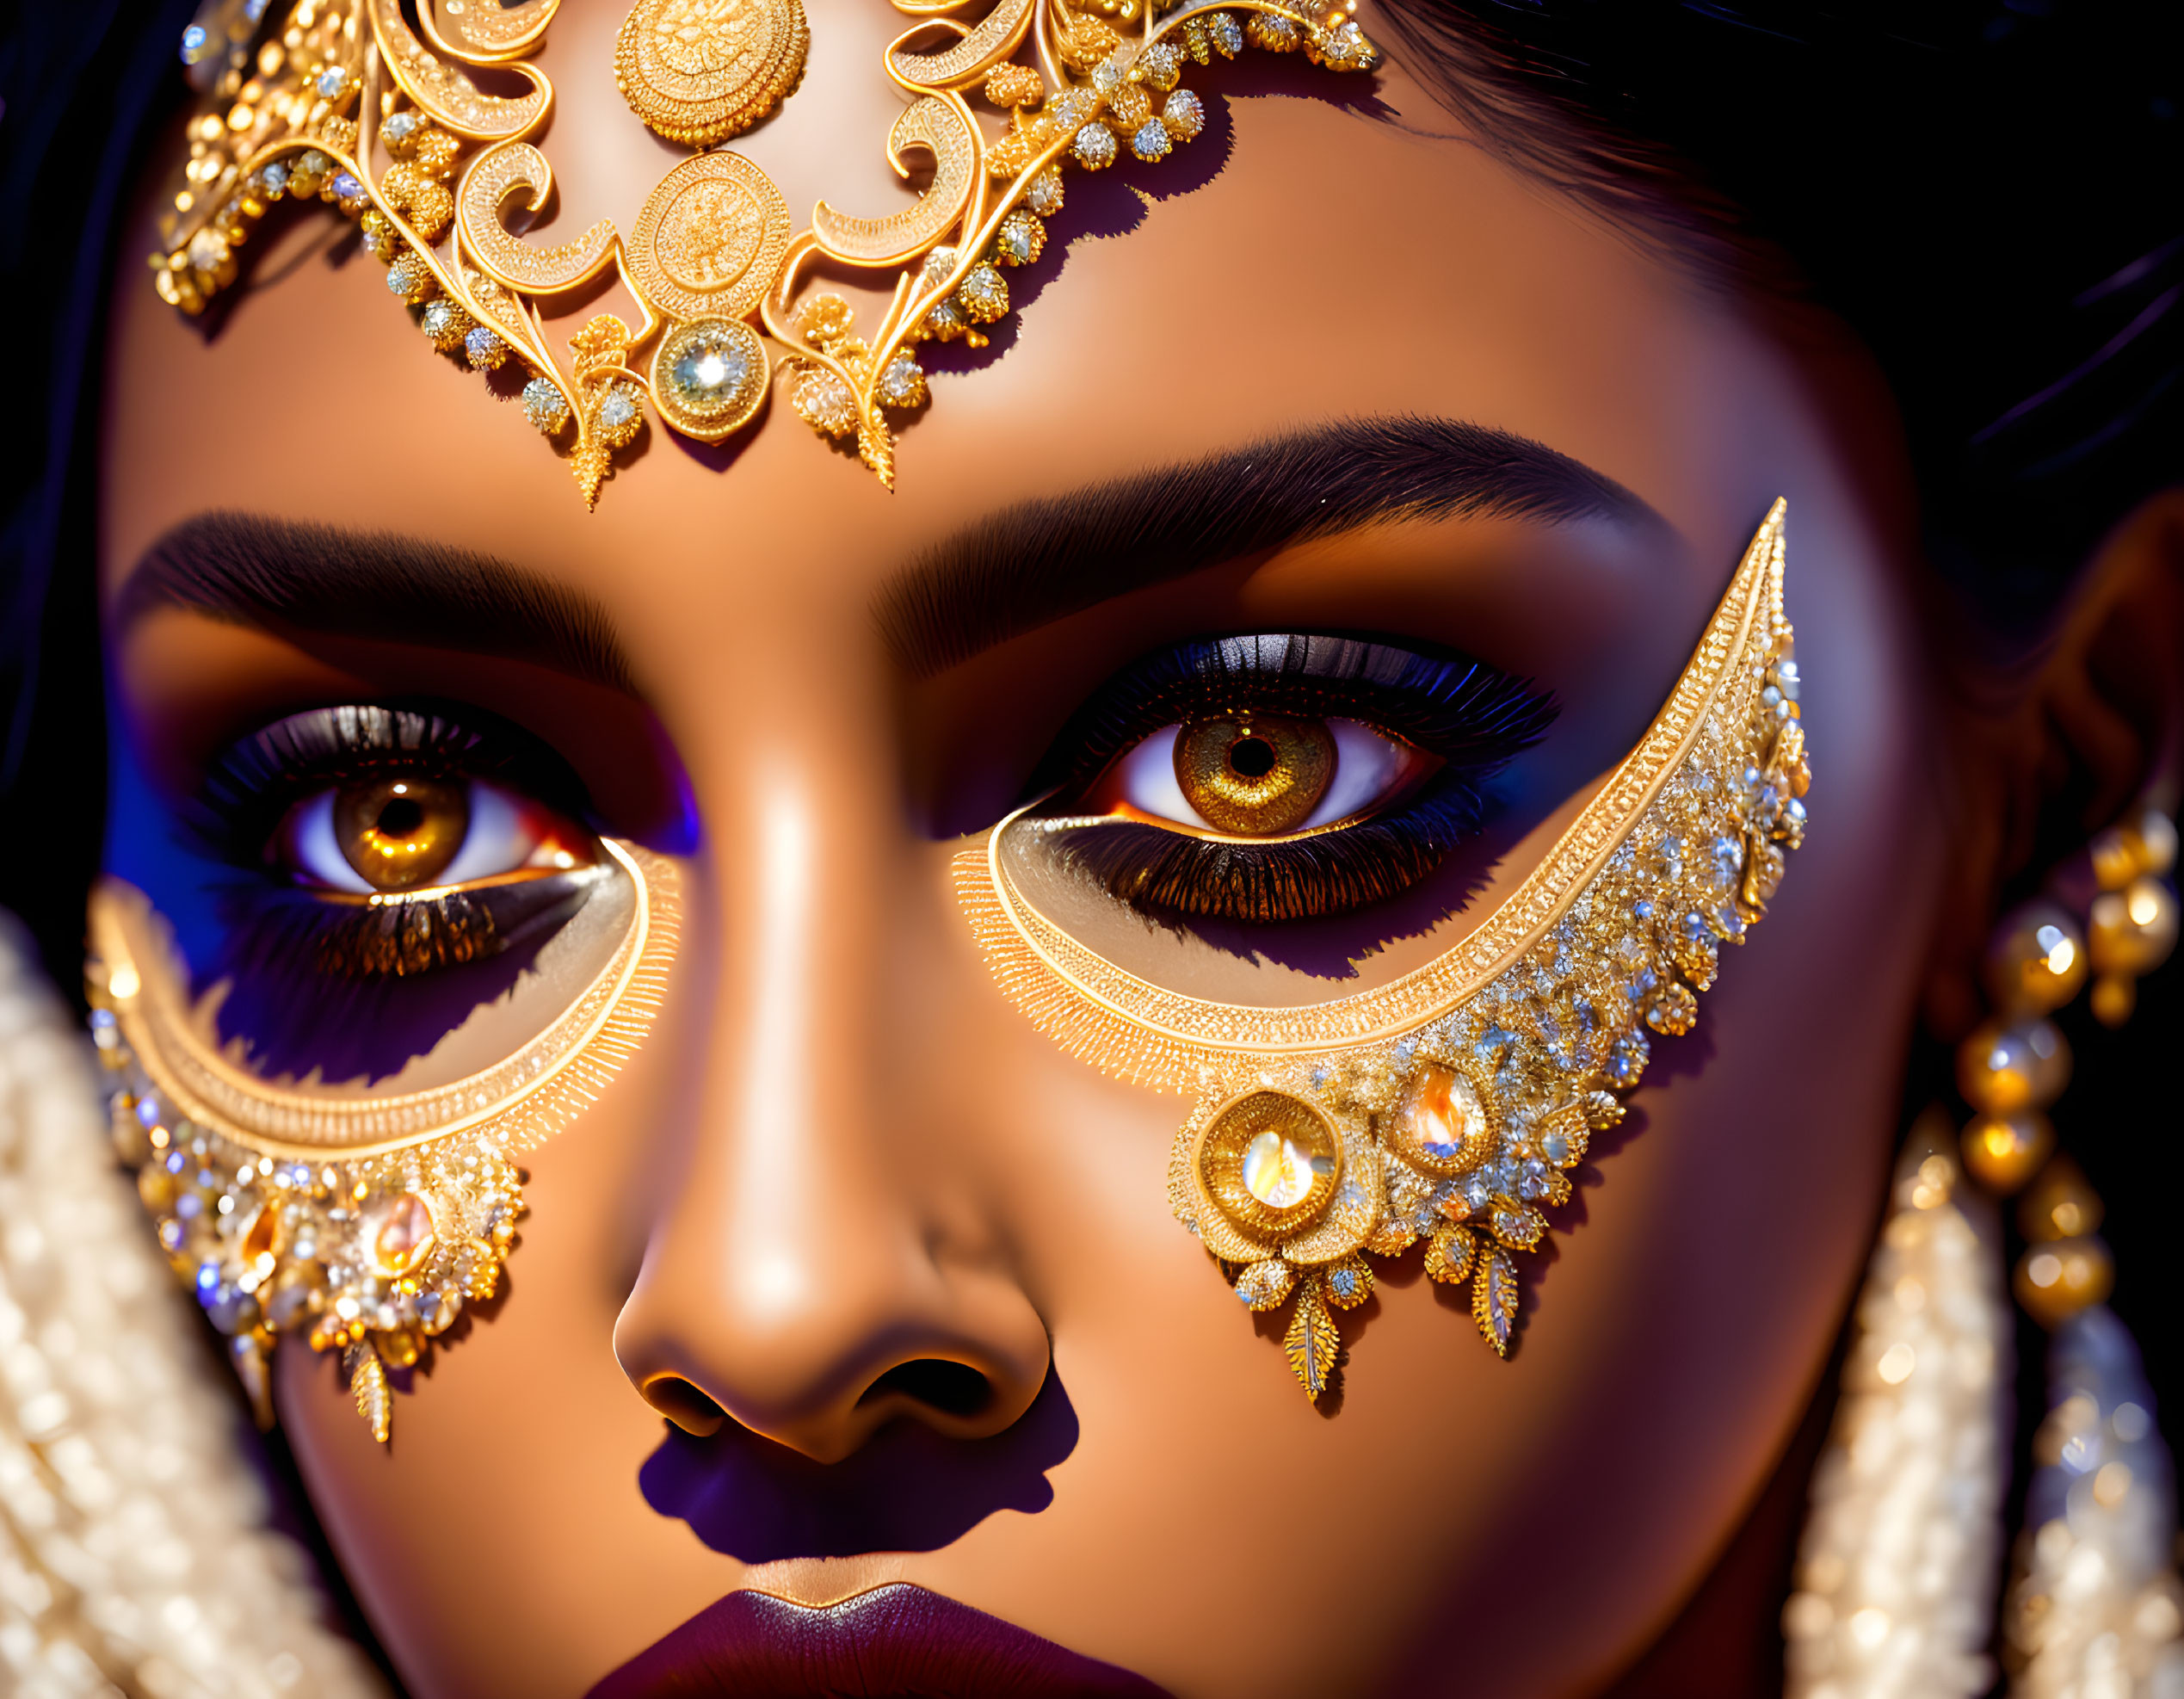 Detailed Golden Eye Makeup with Intricate Designs and Jewels